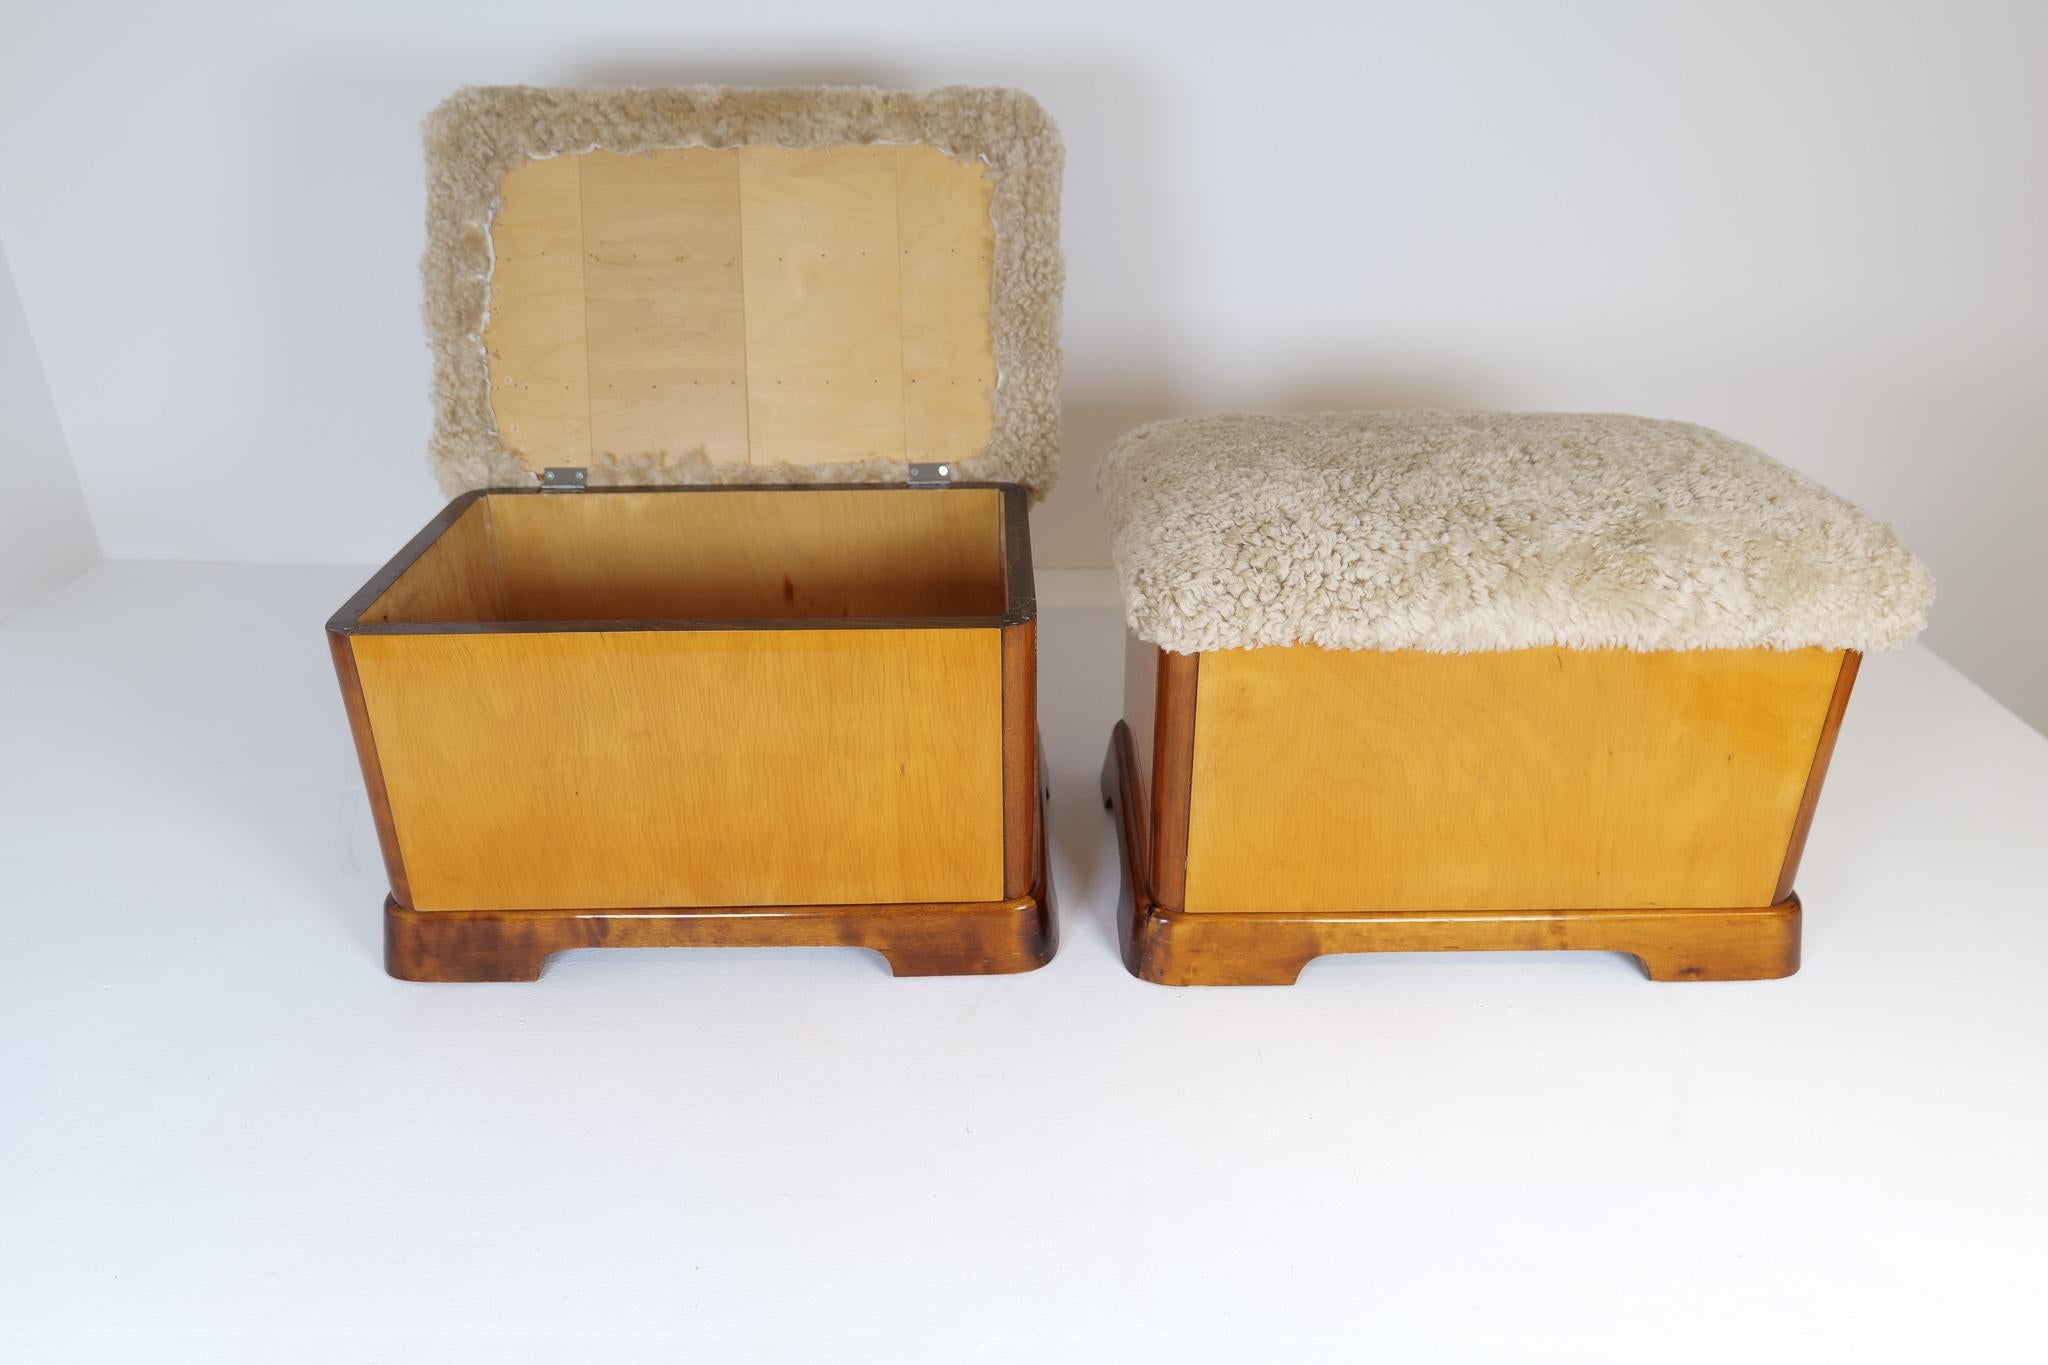 Swedish Art Deco Stools in Lacquered Birch and Sheepskin/Shearling Seat 1940s For Sale 5